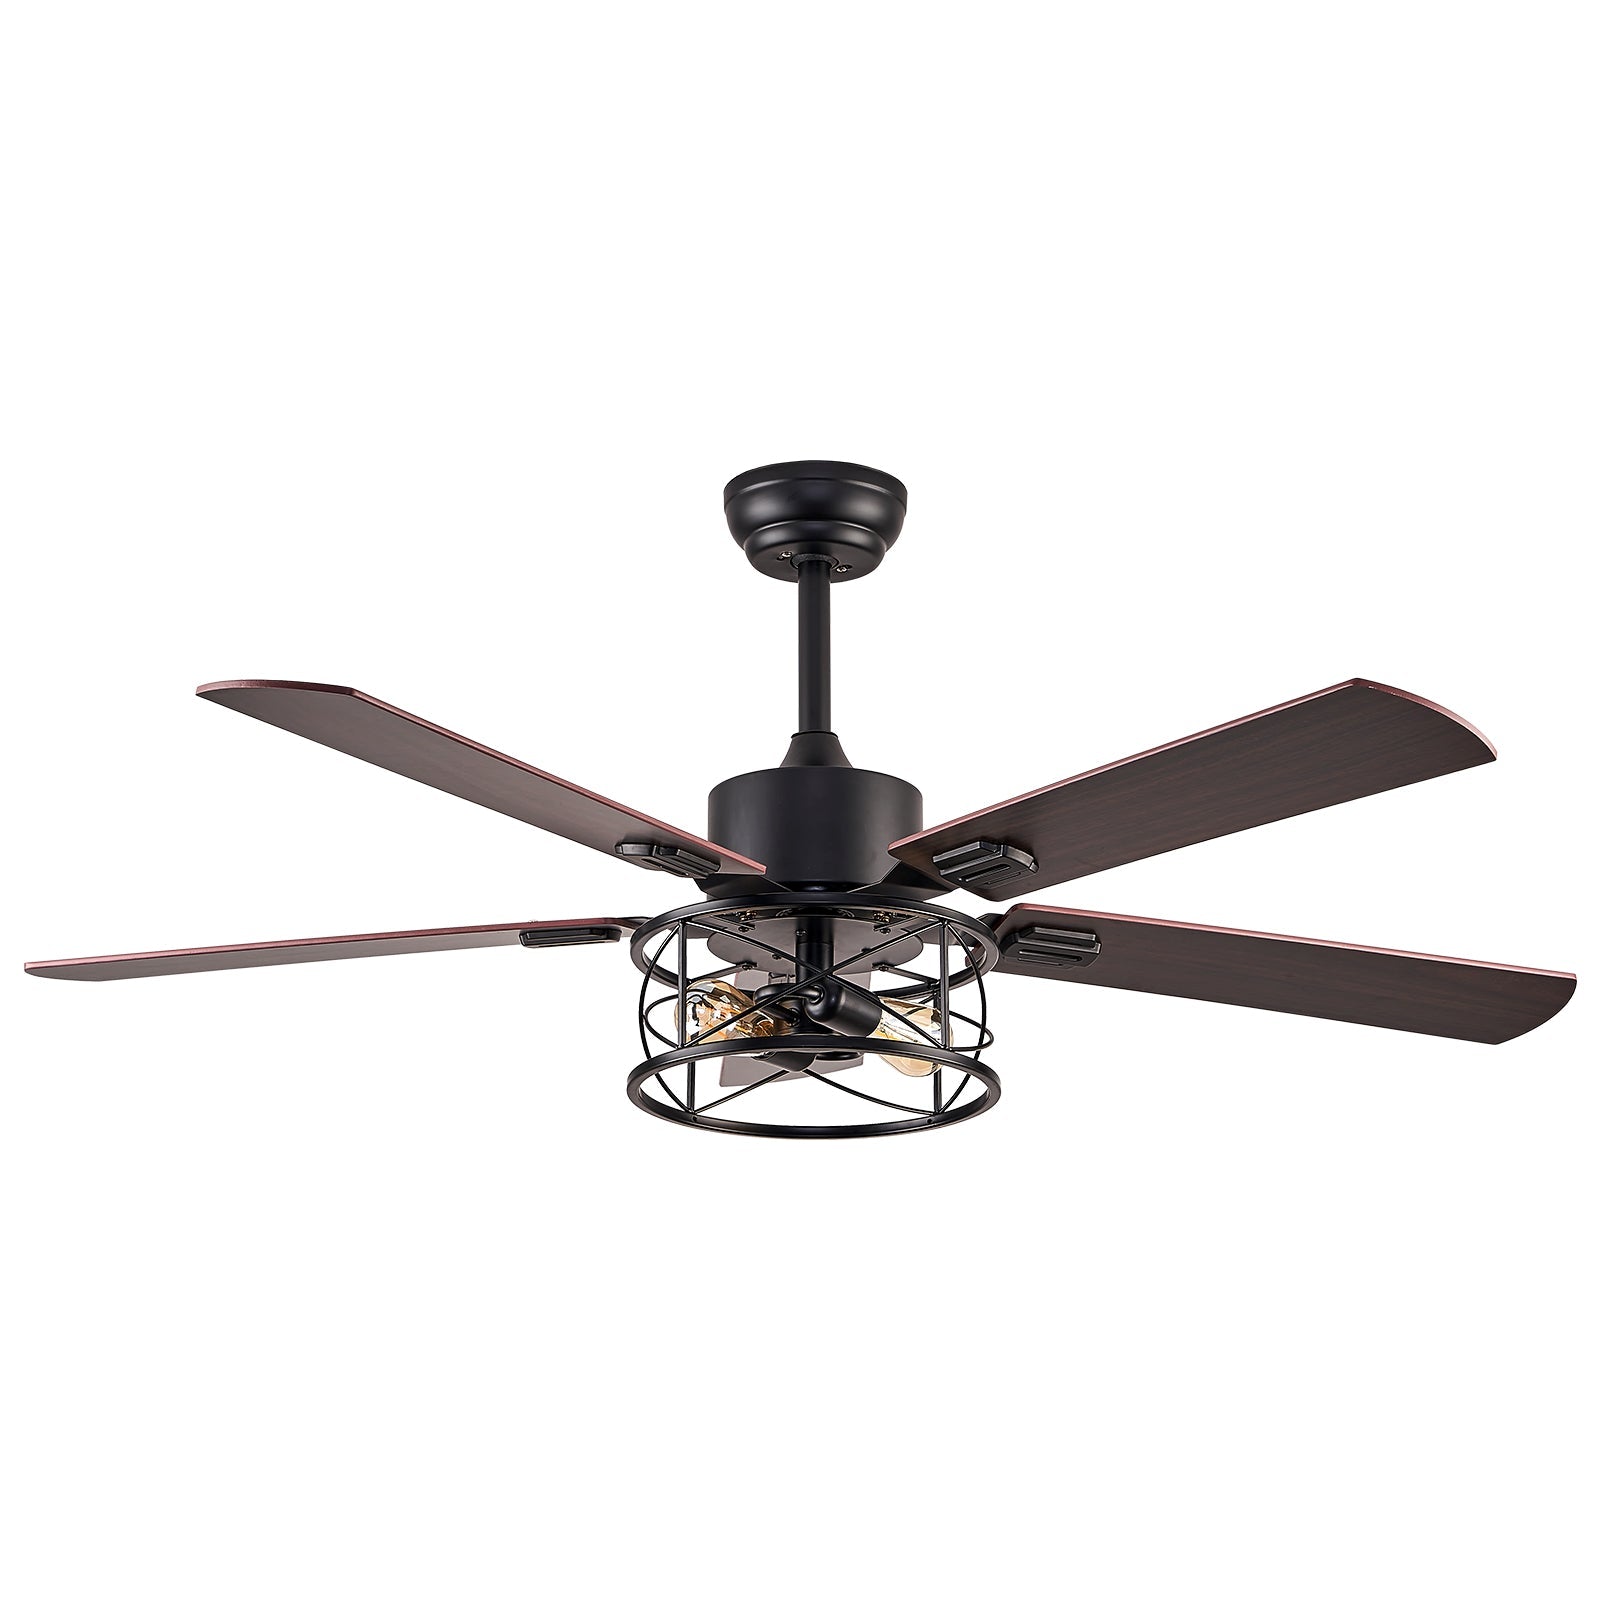 Valeria 52" Ceiling Fan 6-Speed, Reverse, Timer, Natural Wind, 40W Power Light Chandelier Over Dining Table, Living Room